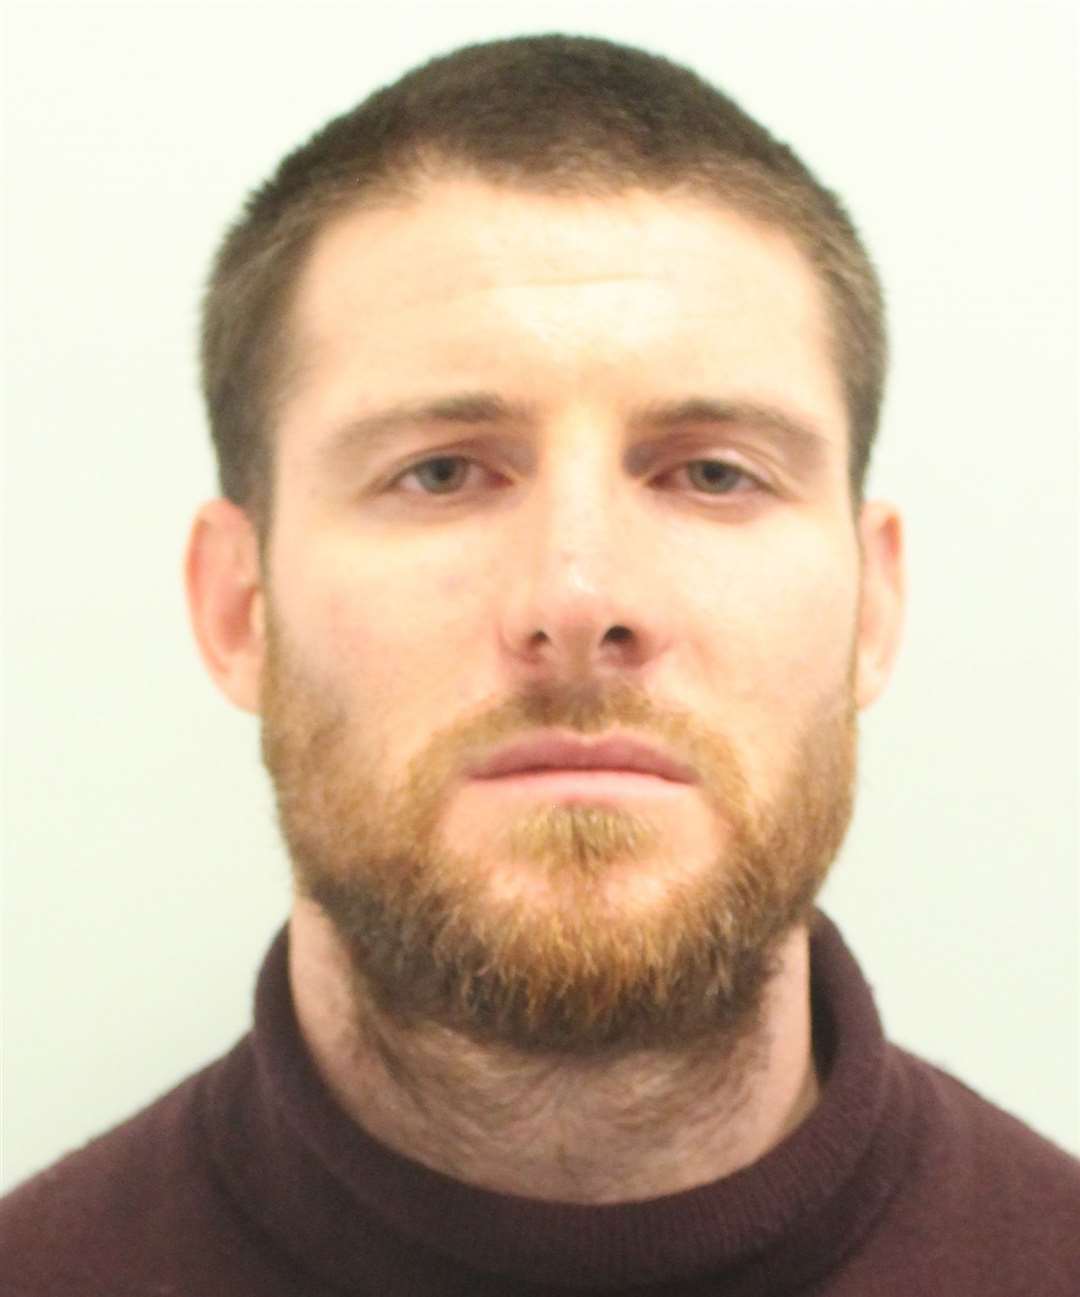 Shane O'Brien will be sentenced later this month. Picture: Metropolitan Police